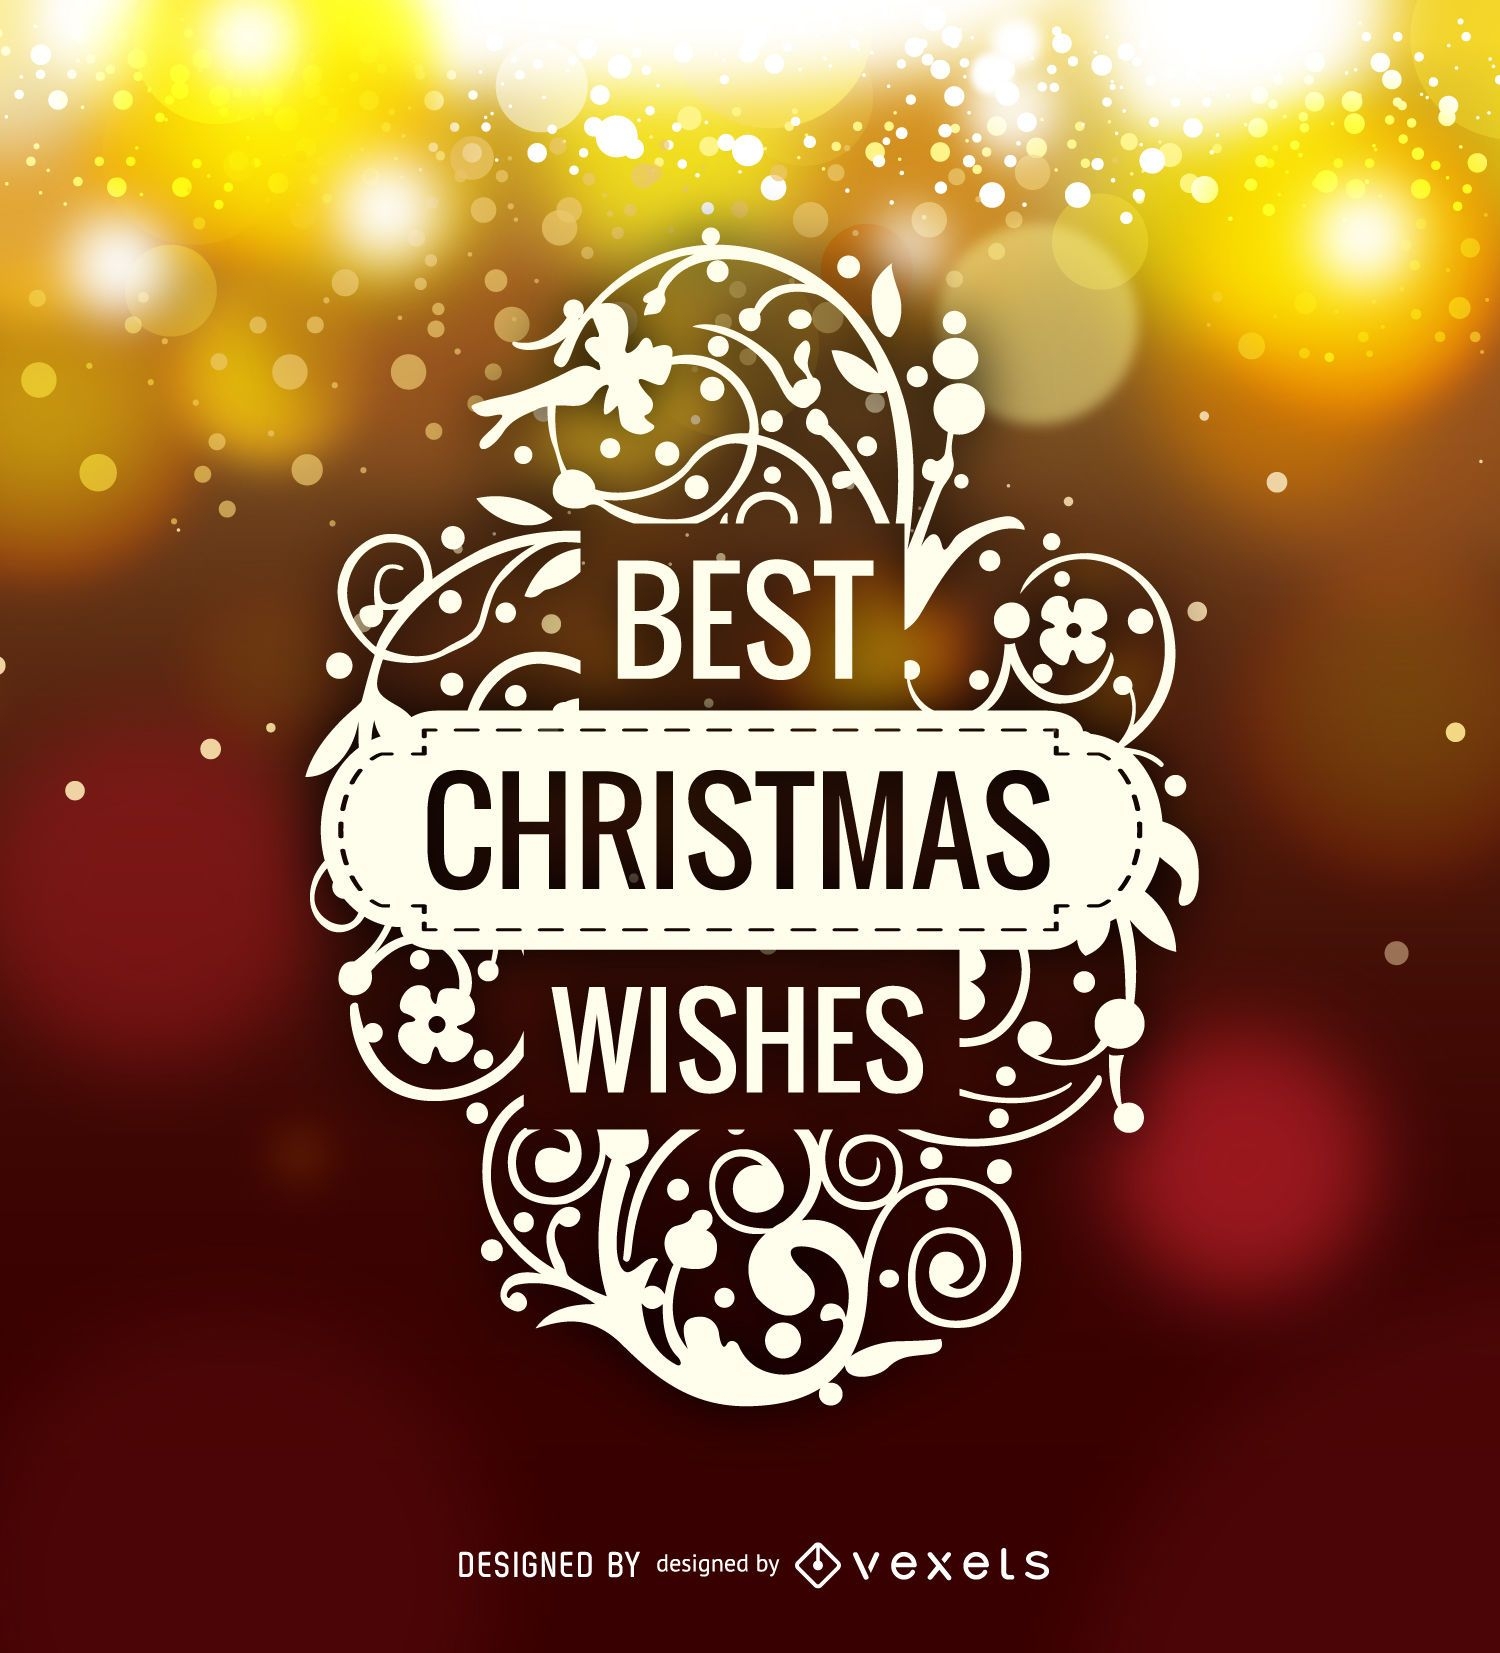 Best Christmas Wishes logo label